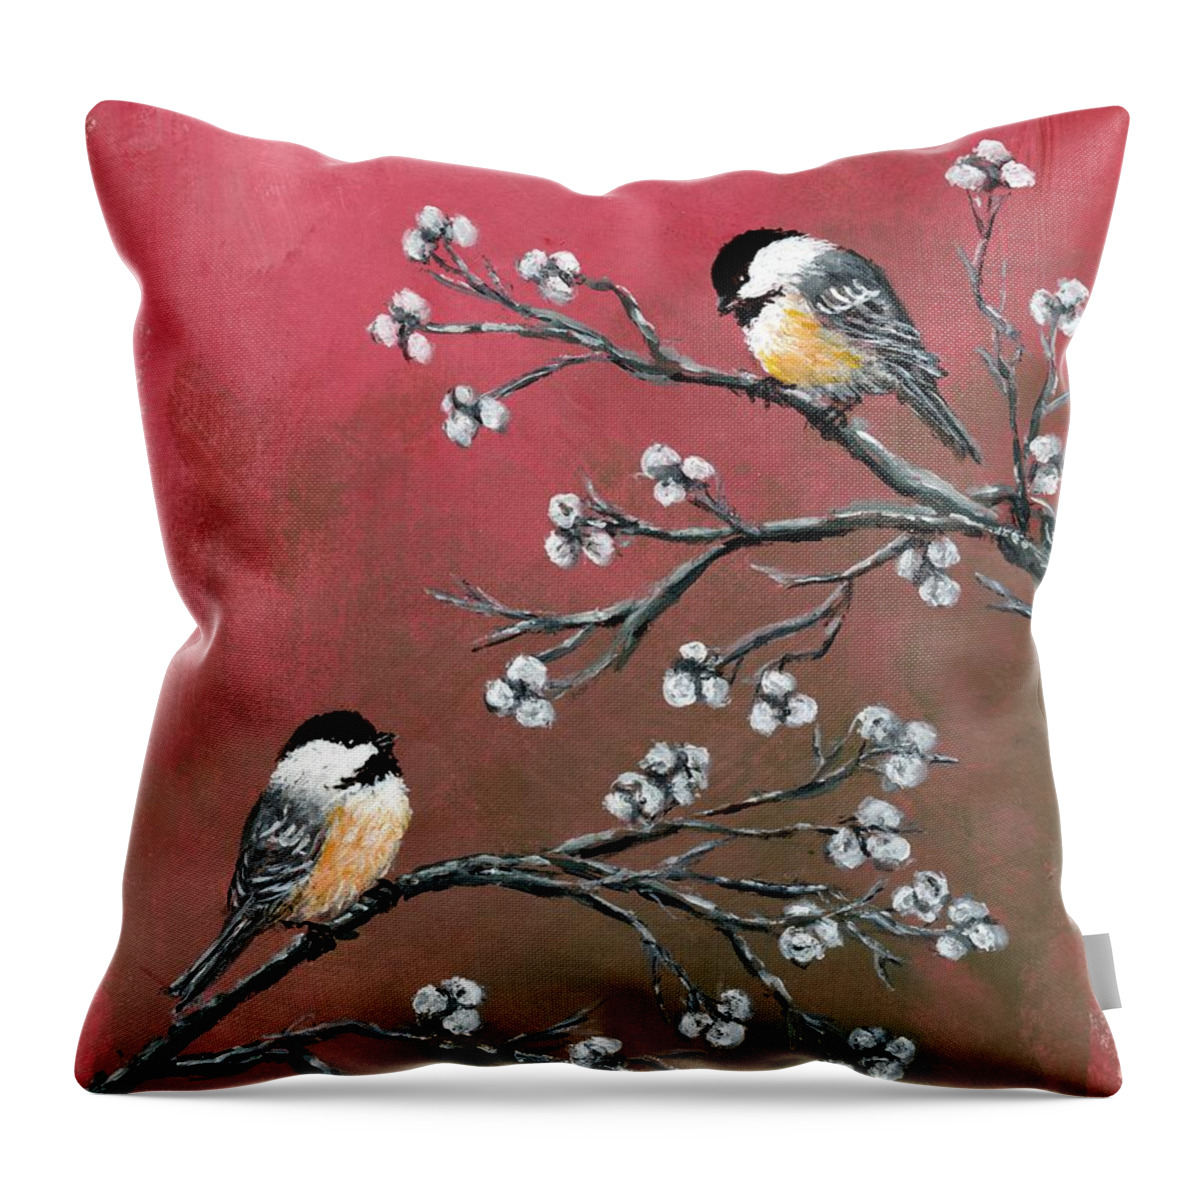 Chickadees Throw Pillow featuring the painting Pink Chickadees by Kathleen McDermott